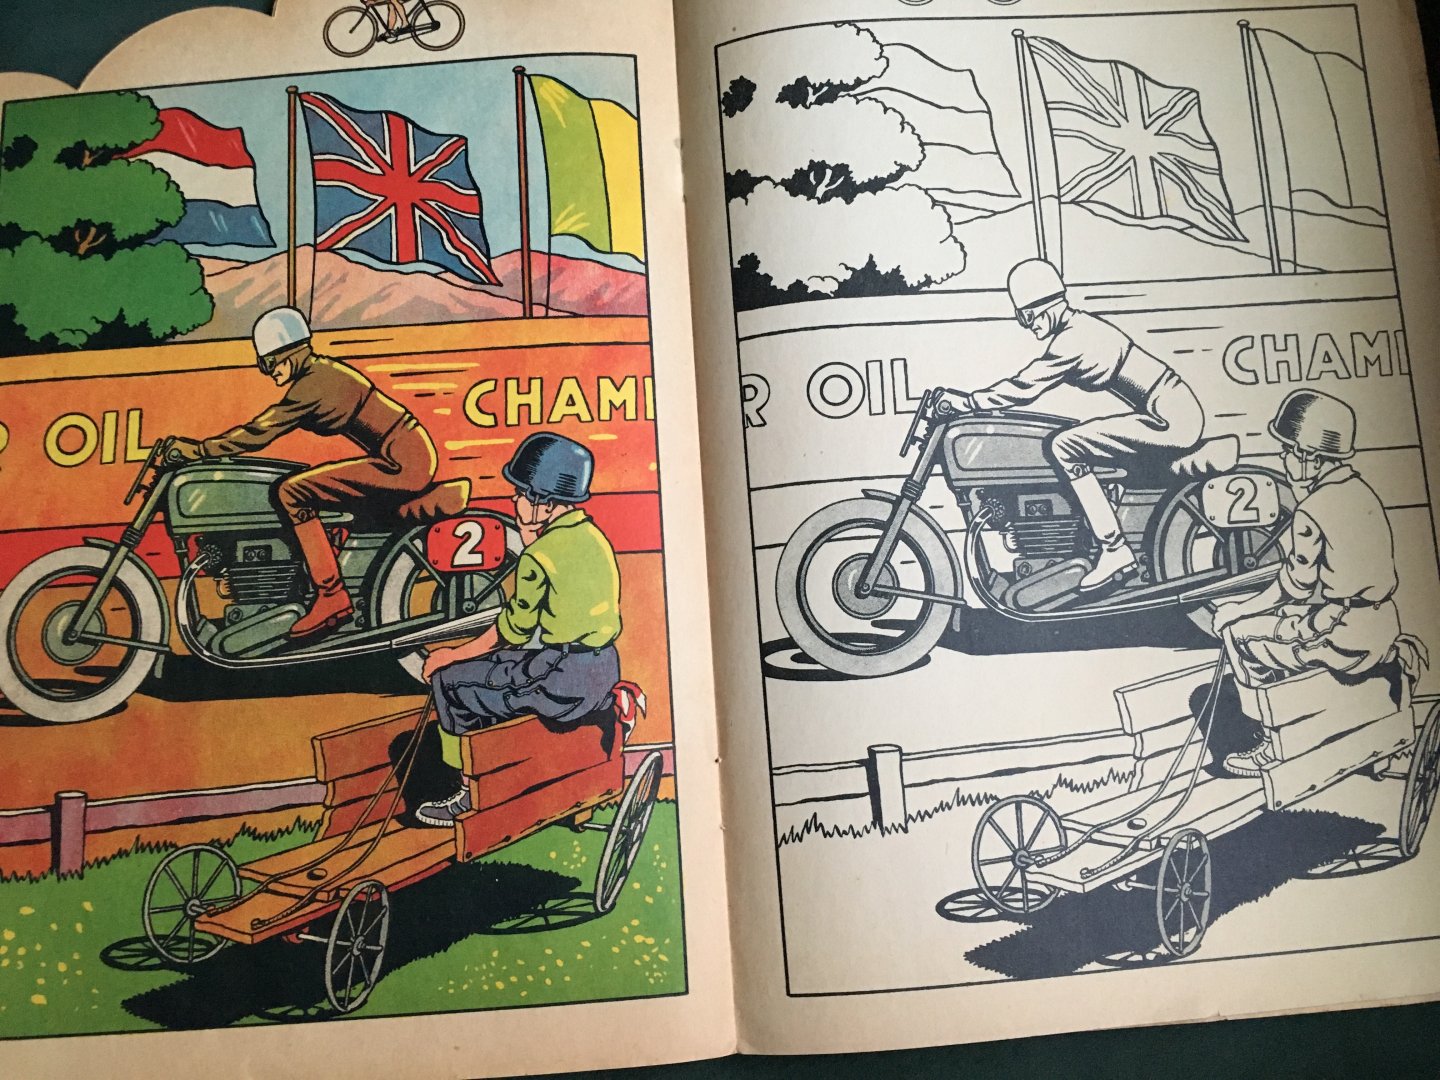  - colouring book with 6 full page illustrations in colour of a bicycle, horse wagon, scooter, motorbike, helicopter, airplane.